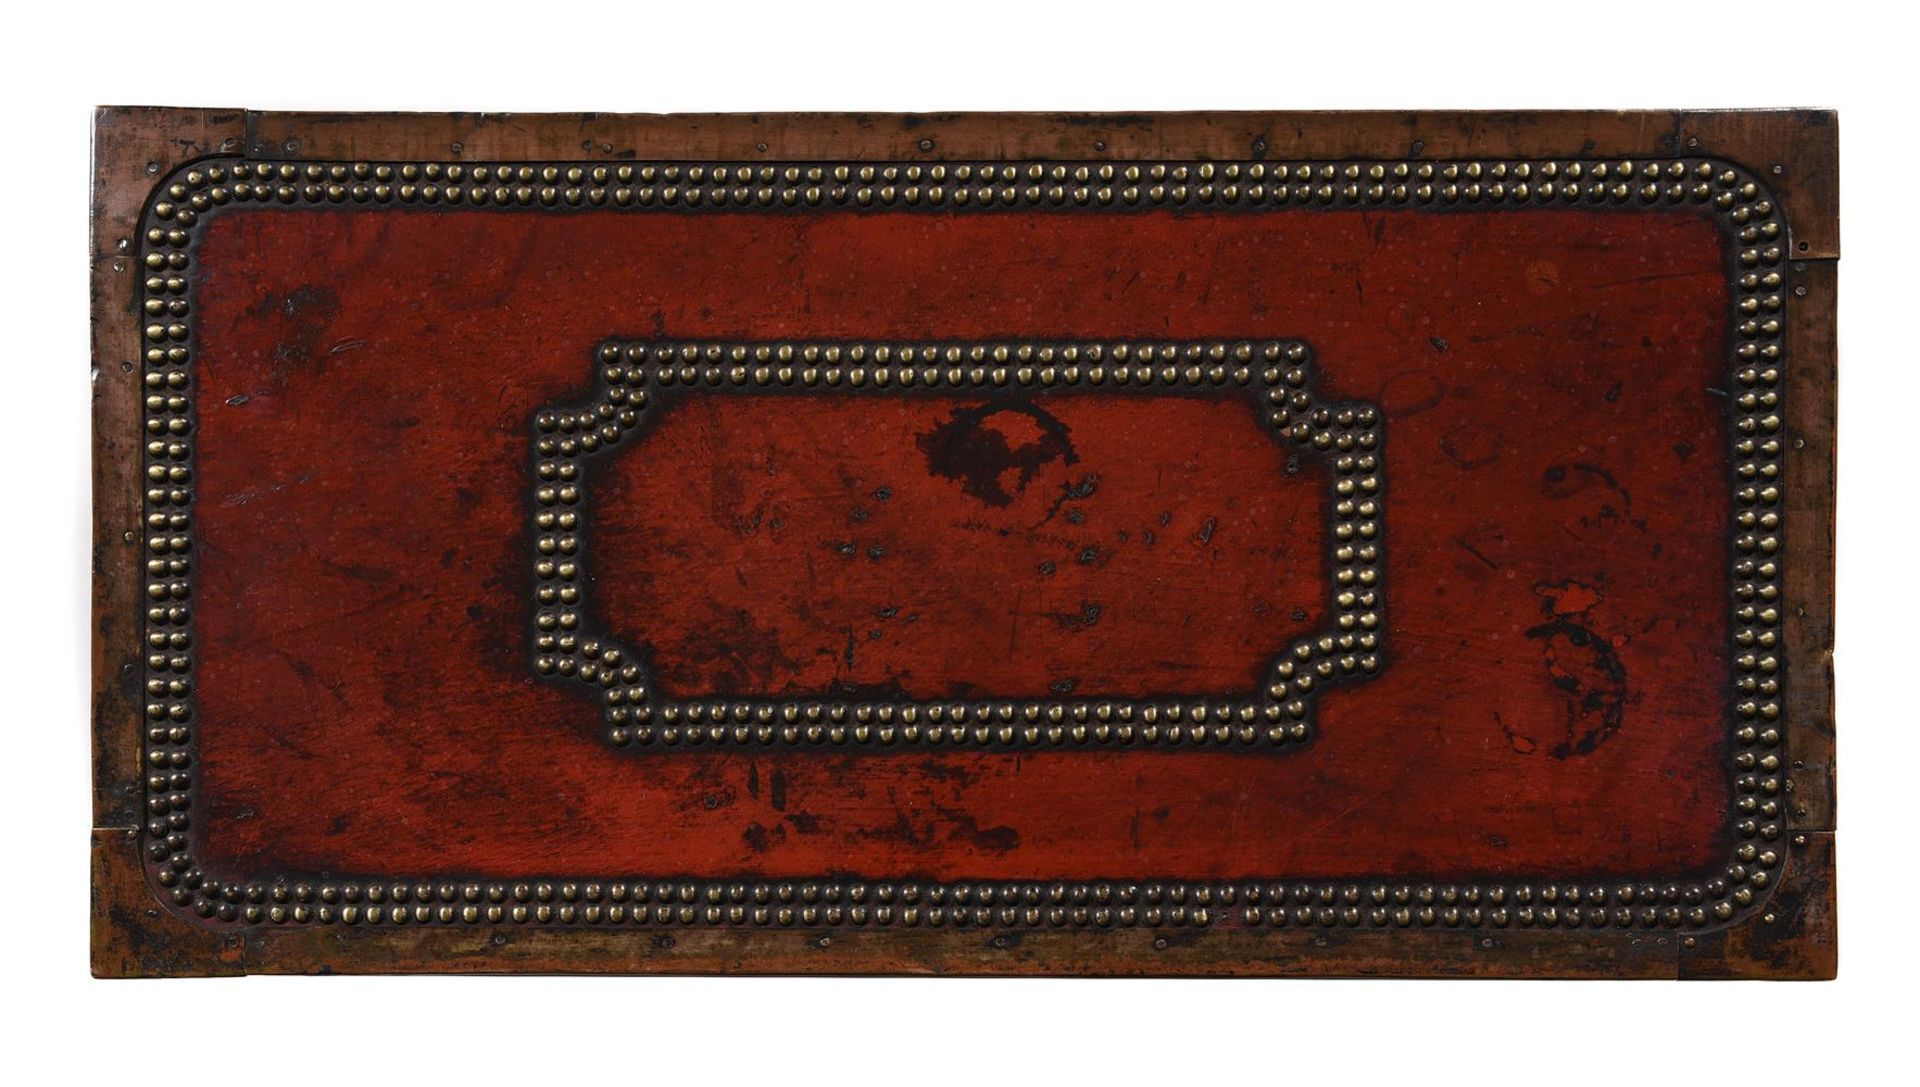 A CHINESE EXPORT RED LEATHER, BRASS BOUND AND STUDDED TRUNK, 19TH CENTURY - Image 5 of 8